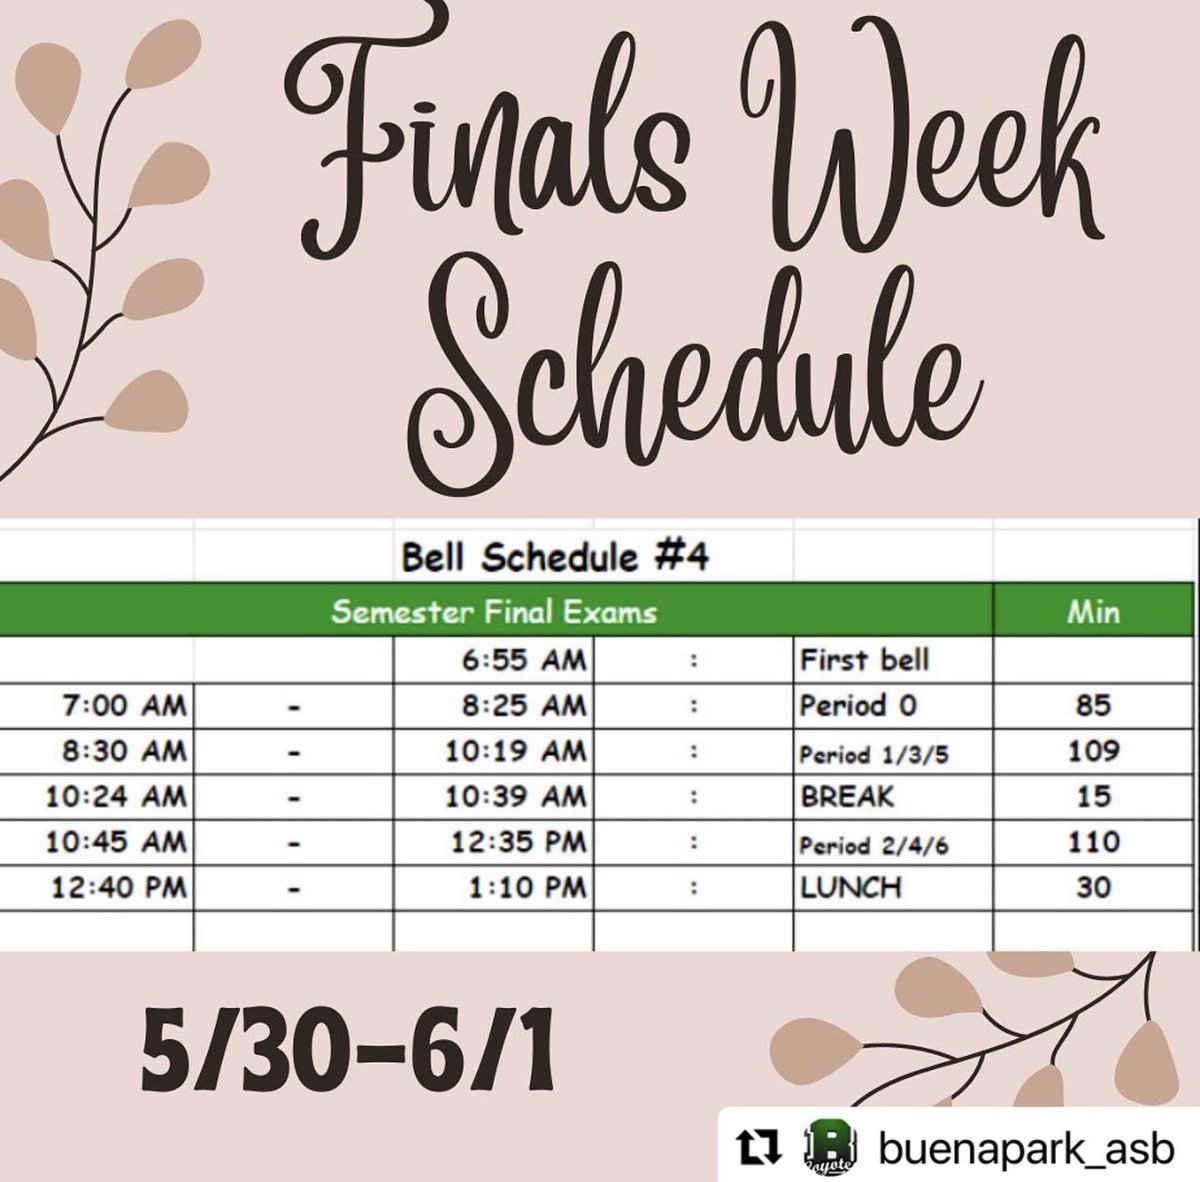 #Repost @buenapark_asb with @use.repost
・・・
COYOTESSS!!! This is this week’s schedule!!💚